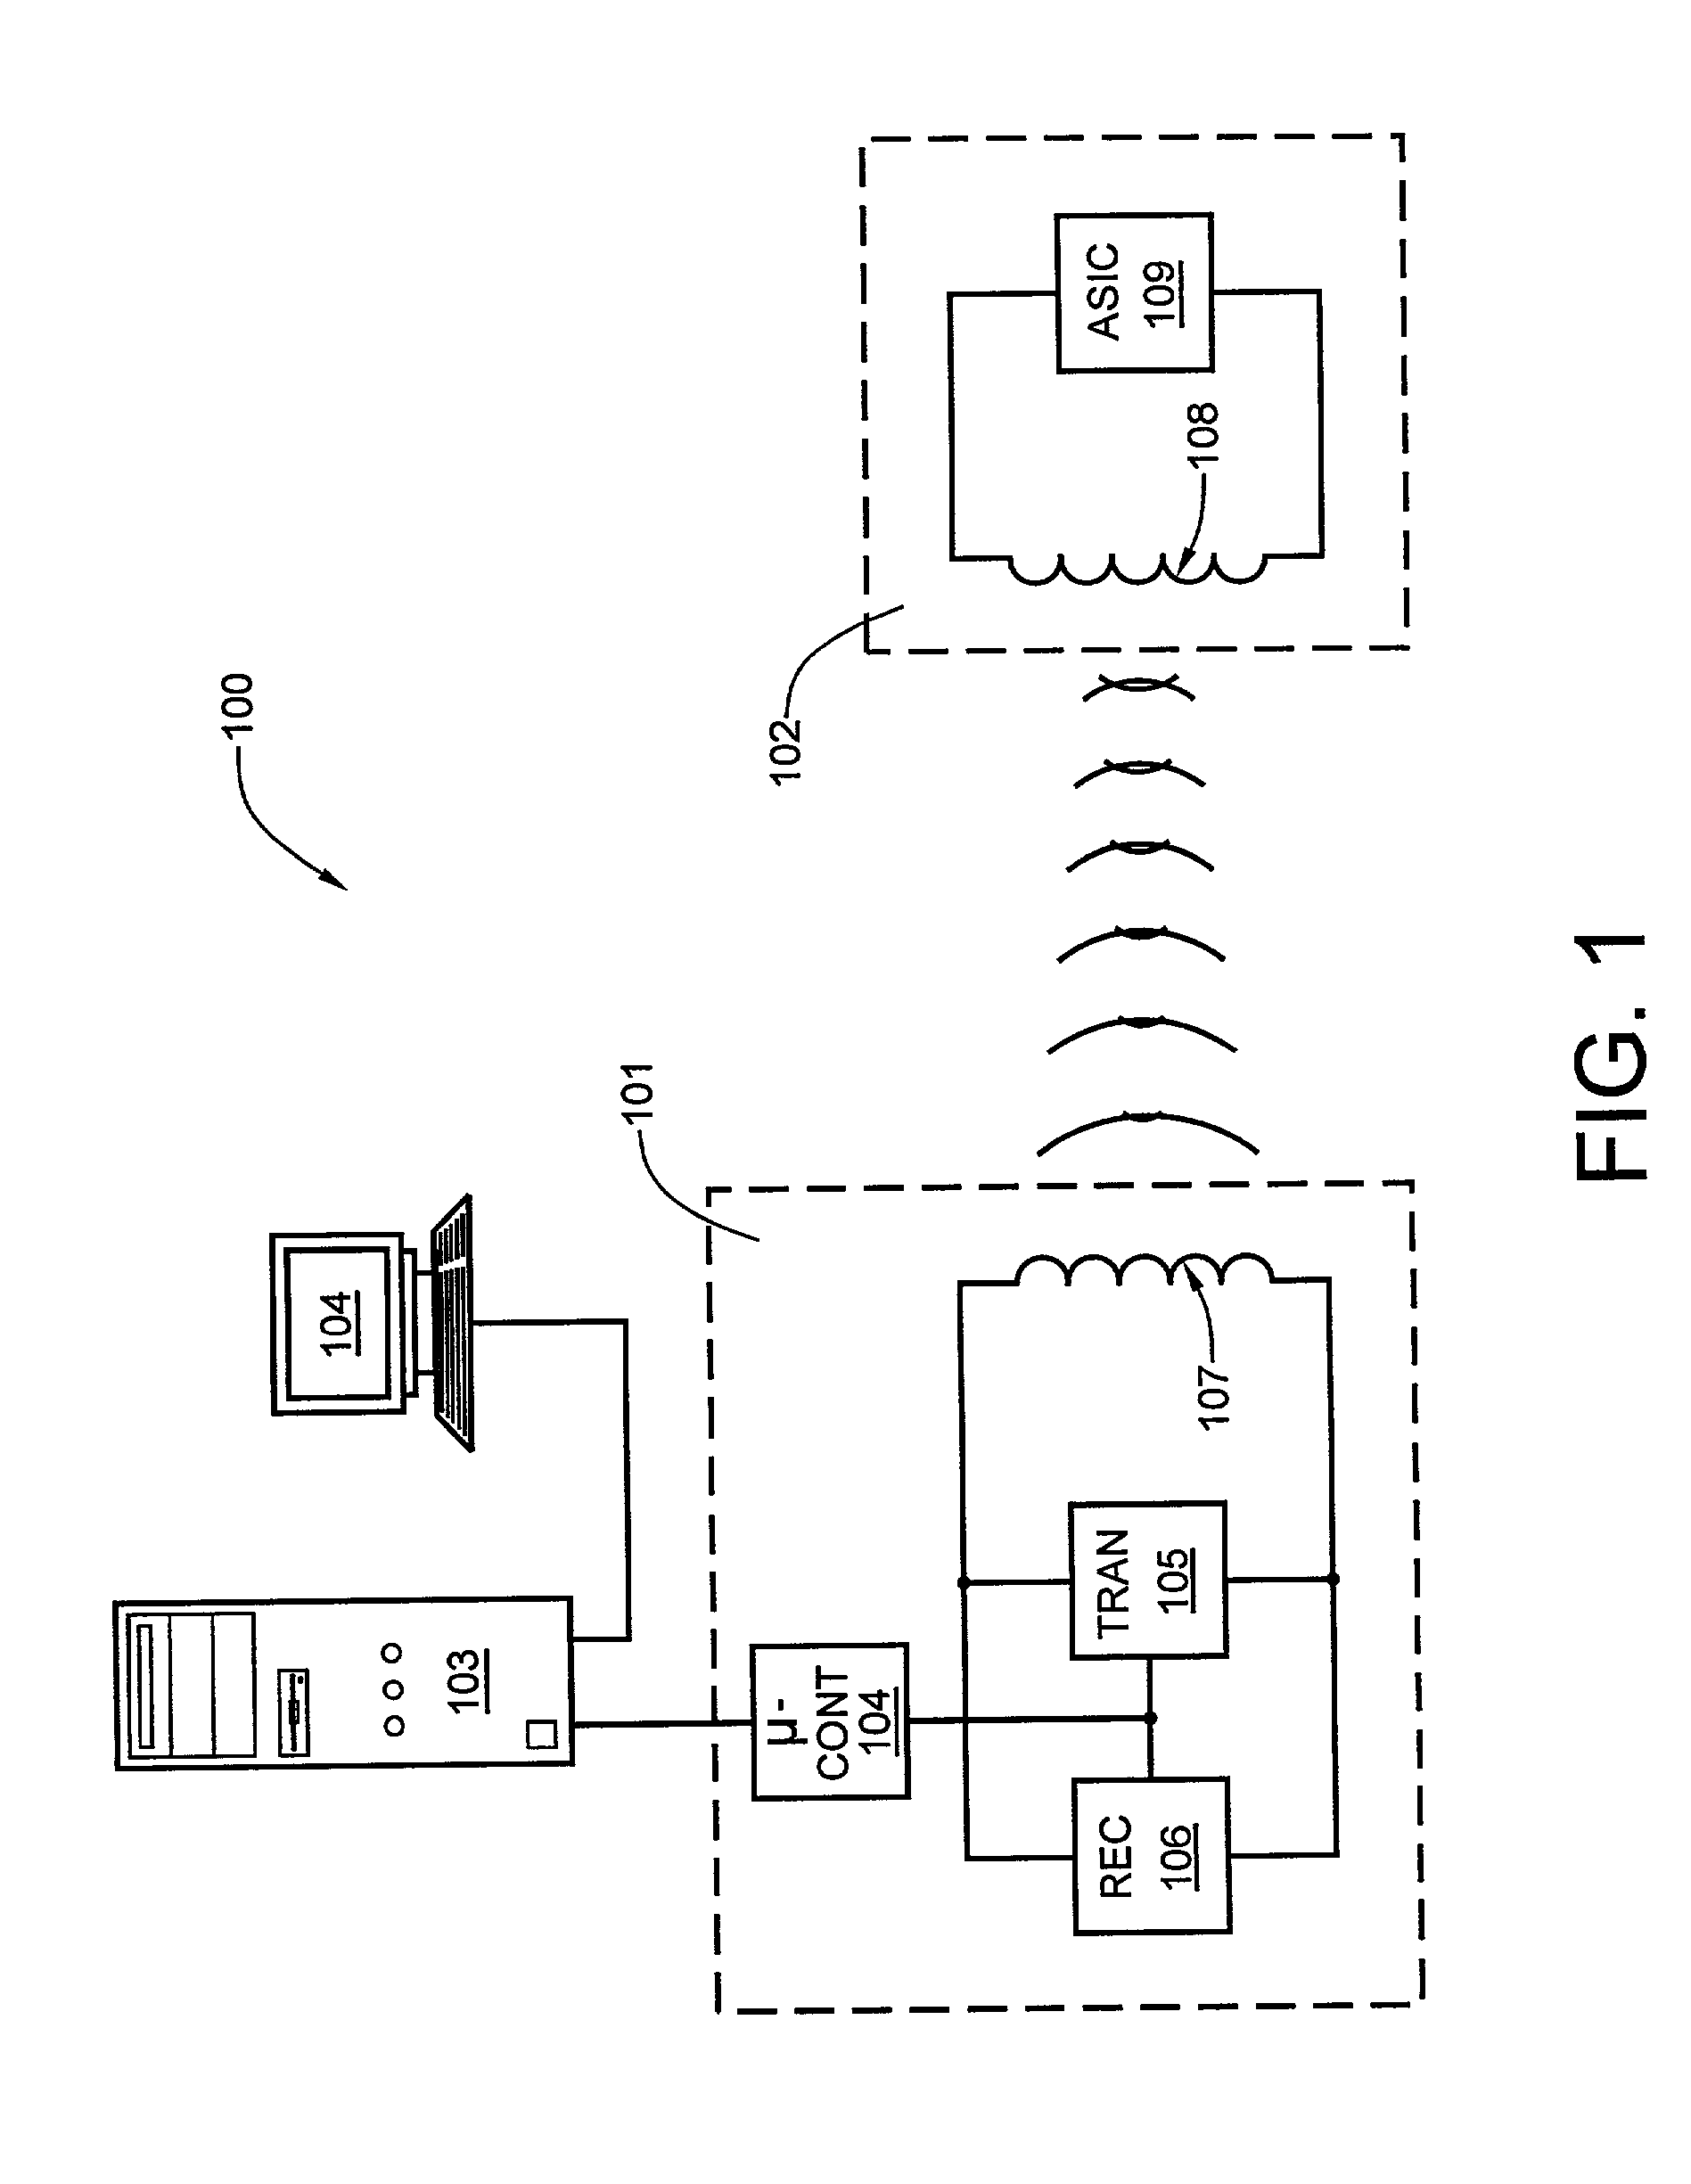 Radio frequency patient identification and information system